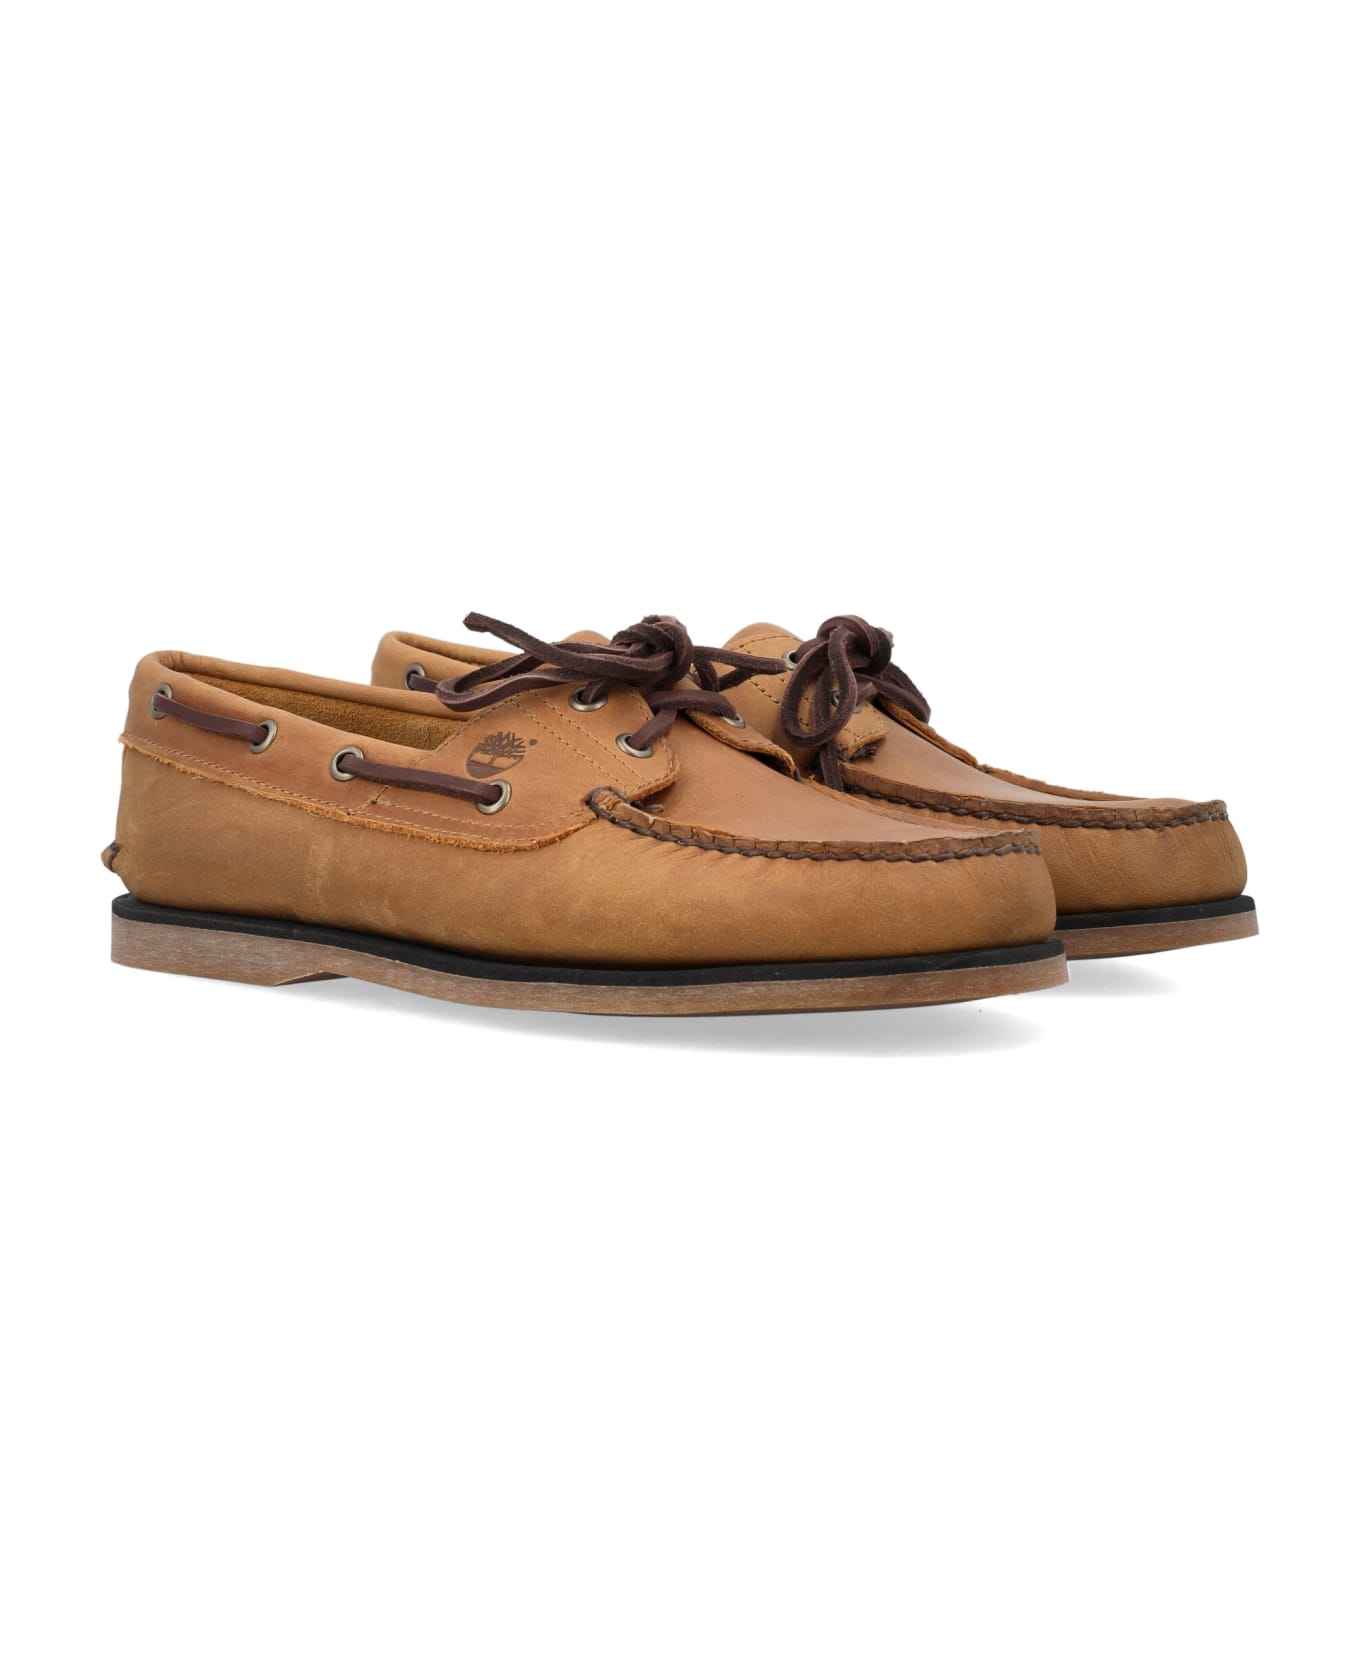 Timberland Classic Boat Loafer - WHEAT